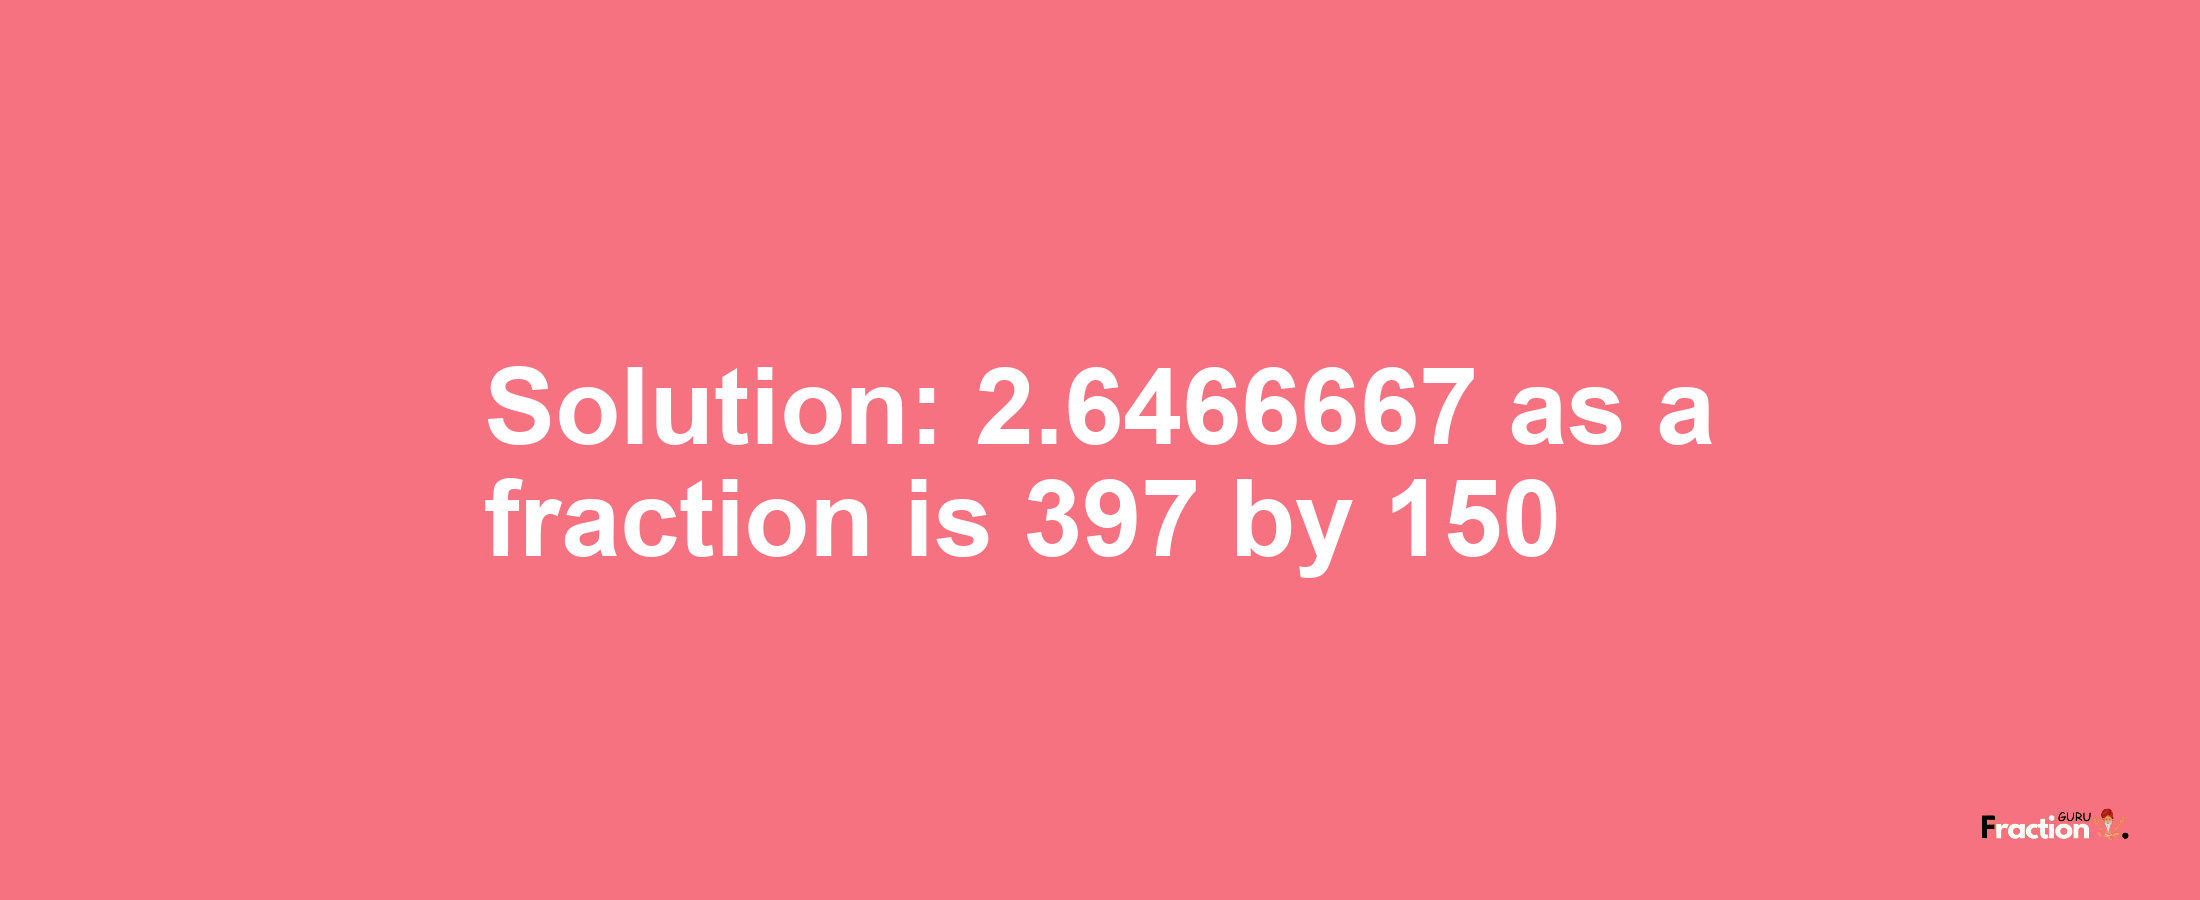 Solution:2.6466667 as a fraction is 397/150